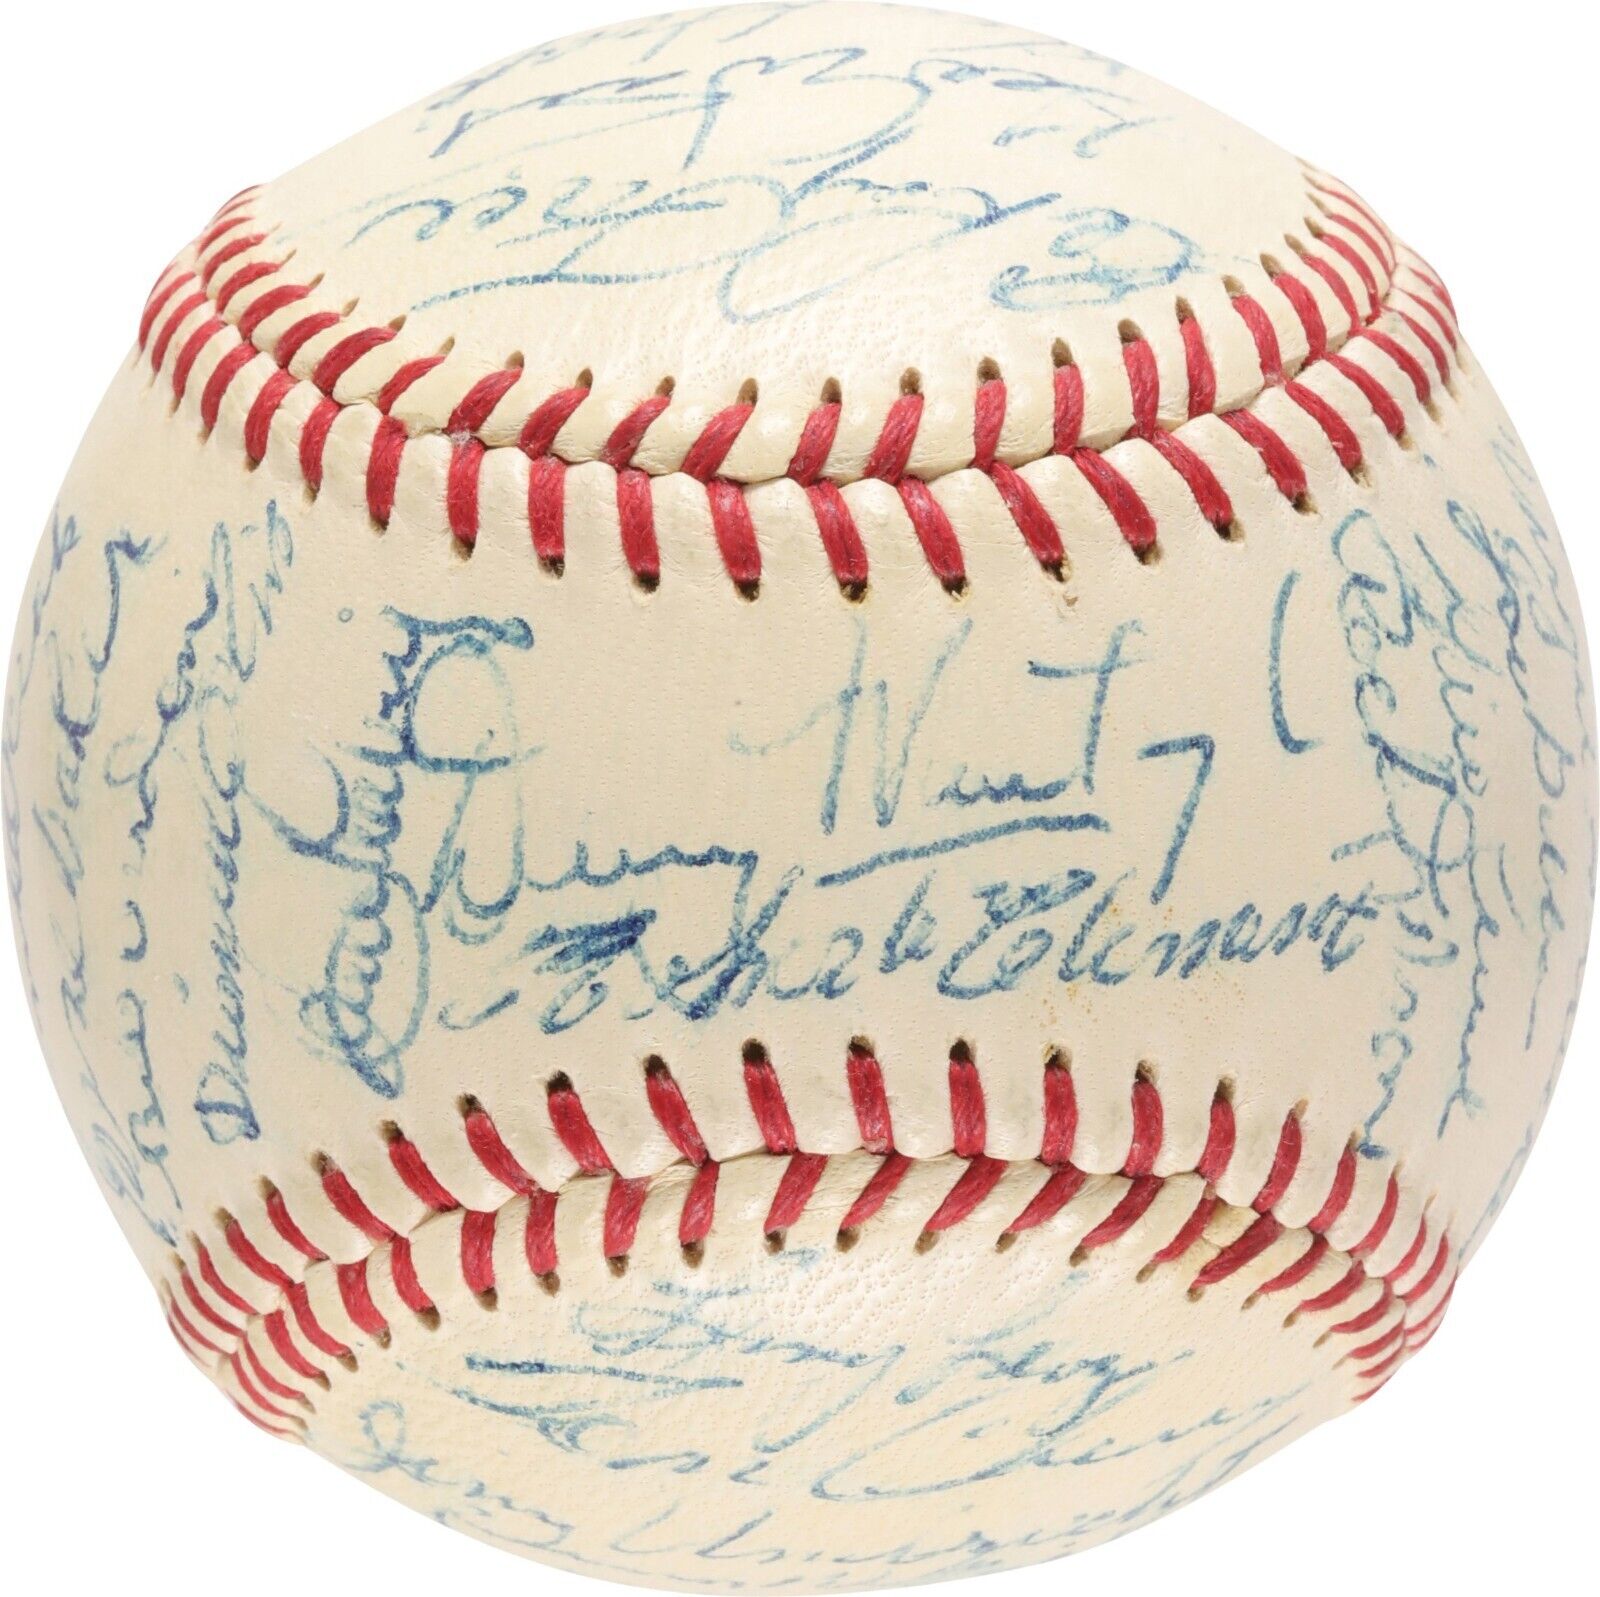 The Finest 1960 Pittsburgh Pirates World Series Champs Team Signed Baseball PSA